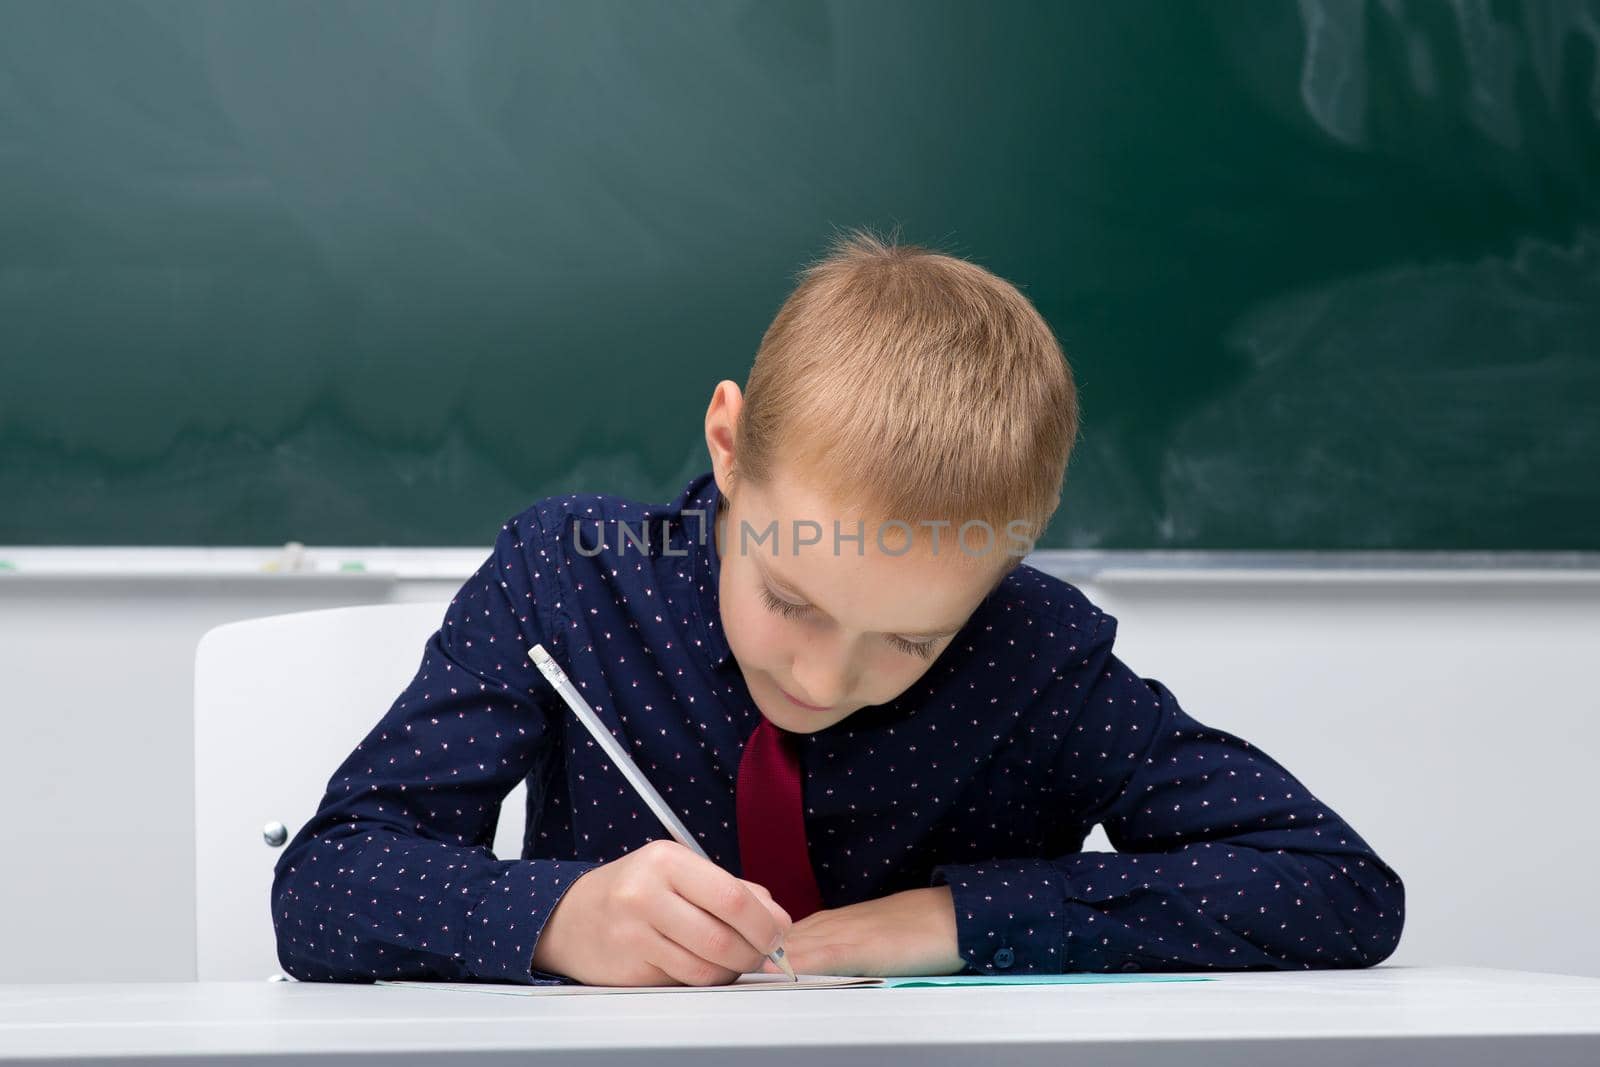 Schoolboy writing in notebook. School student in blue shirt and tie sitting at desk on background of blackboard in classroom. Back to school, education concept